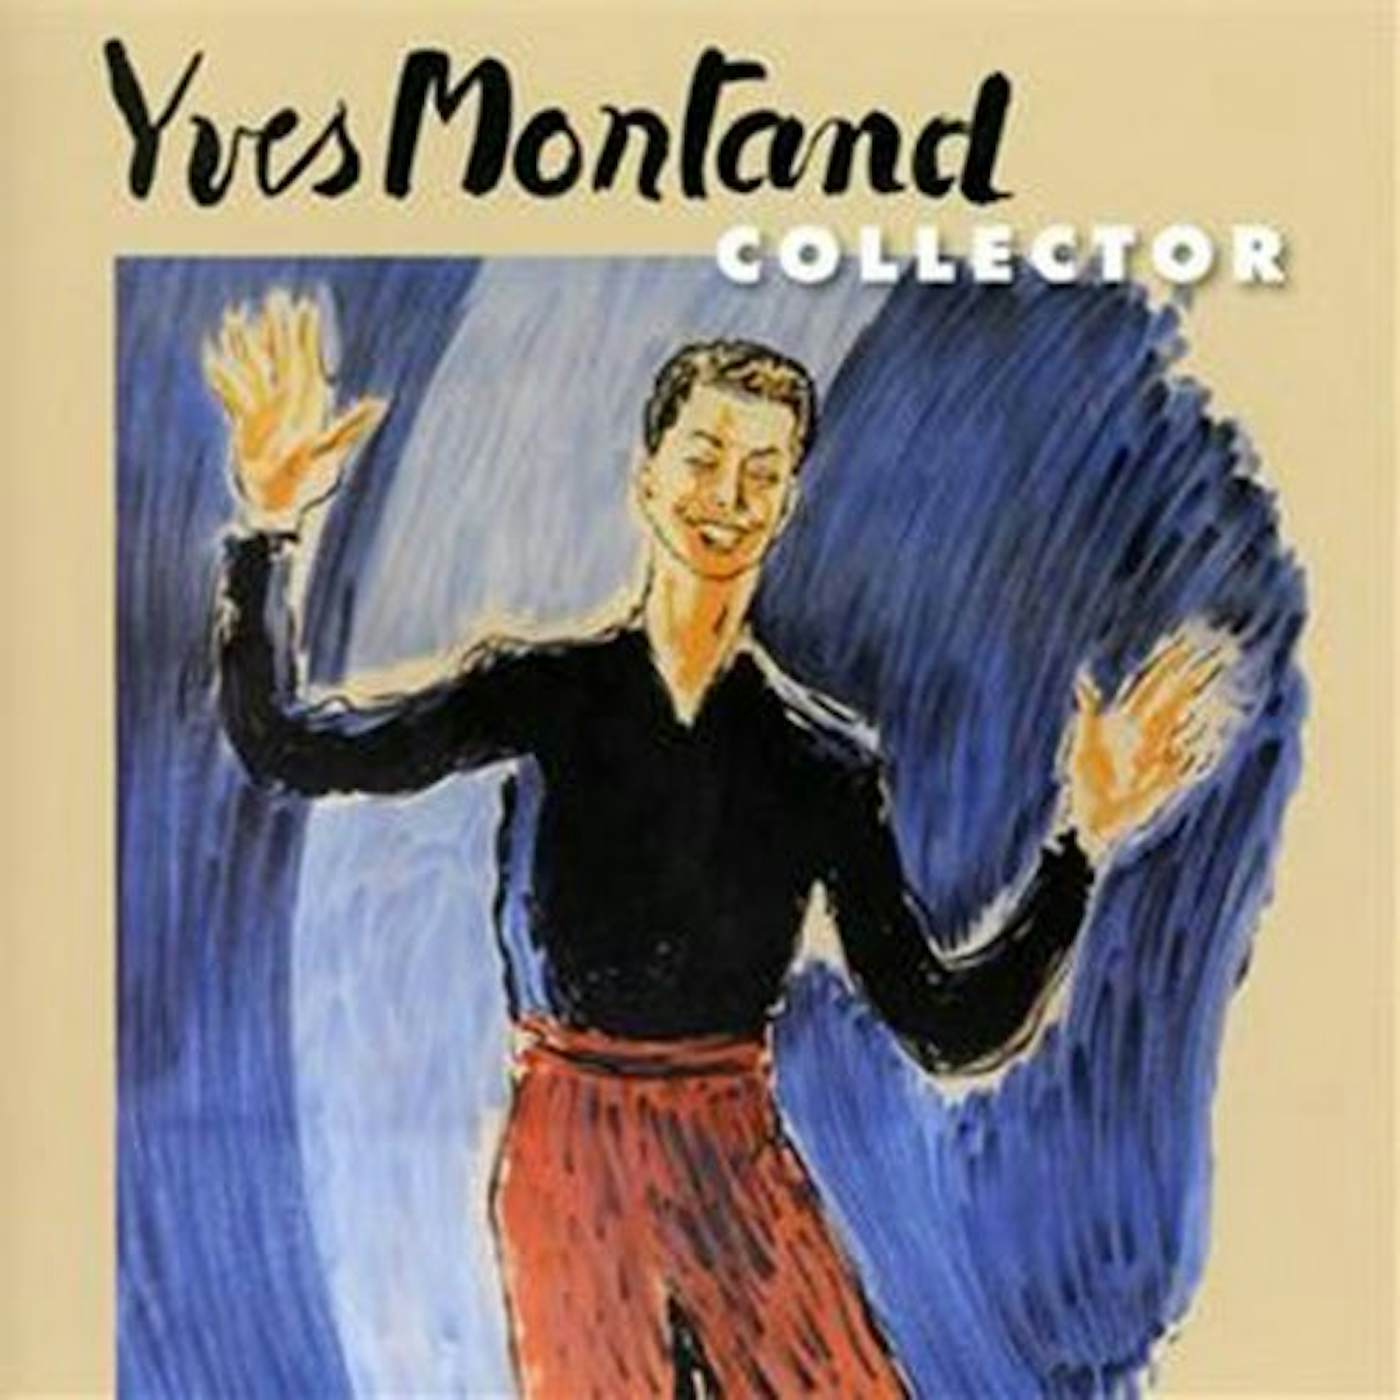 Yves Montand COLLECTOR CD